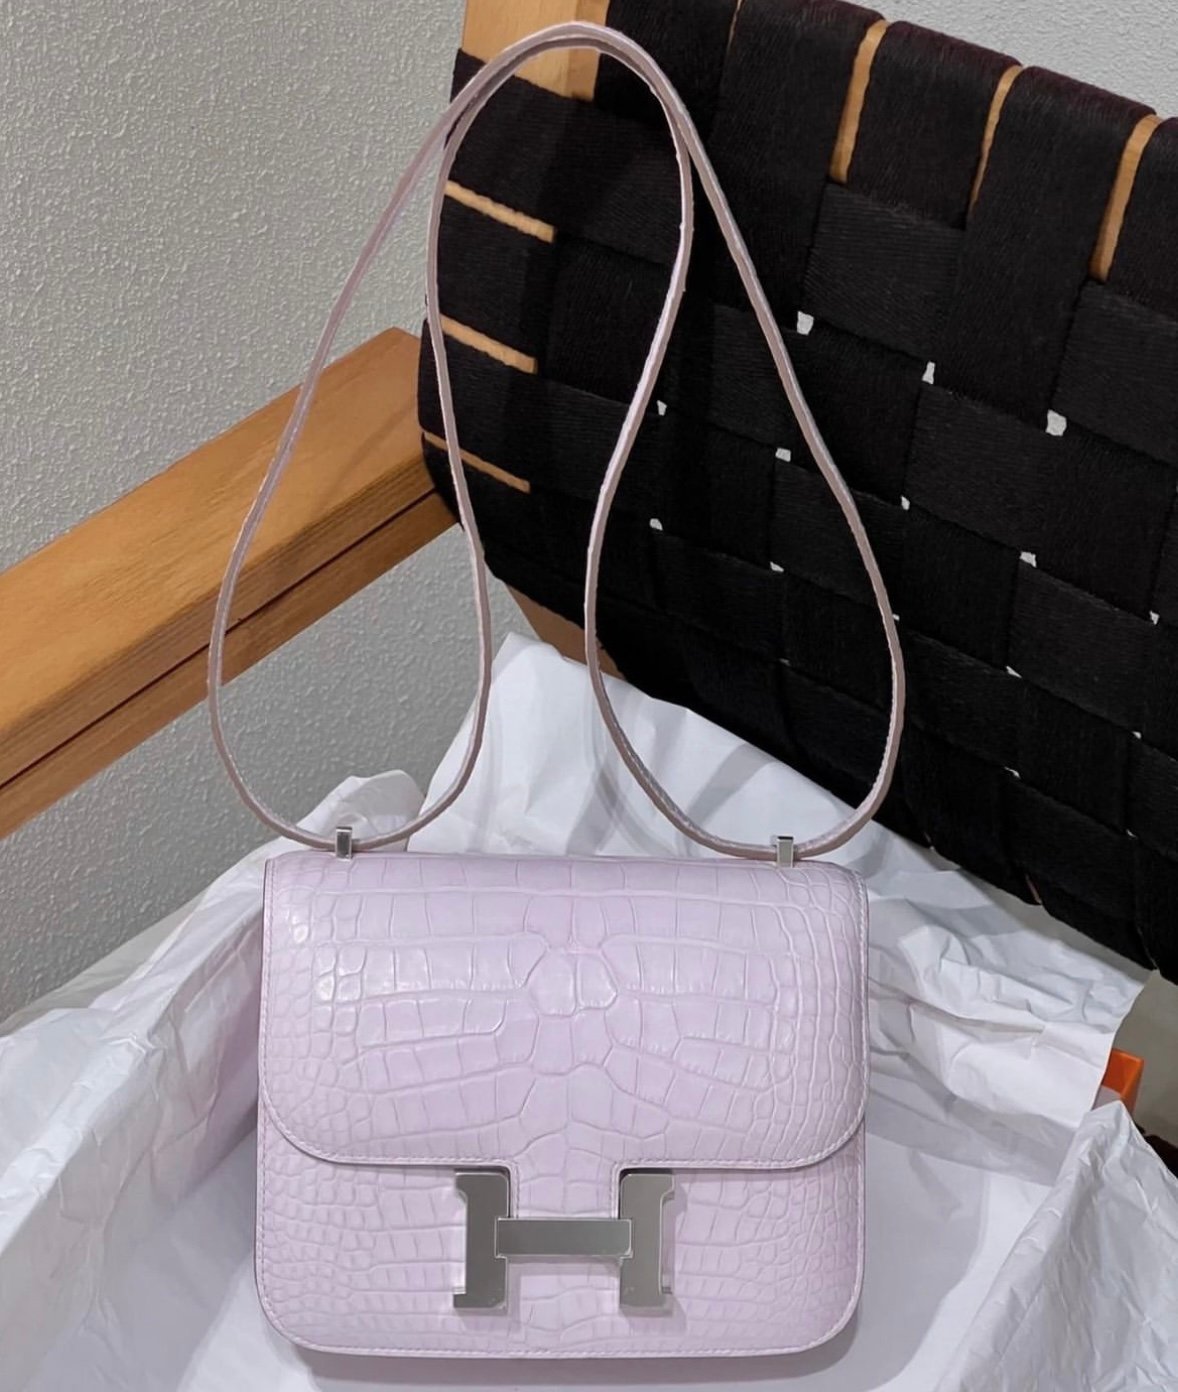 Hermes Most Popular Colors in Depth Review